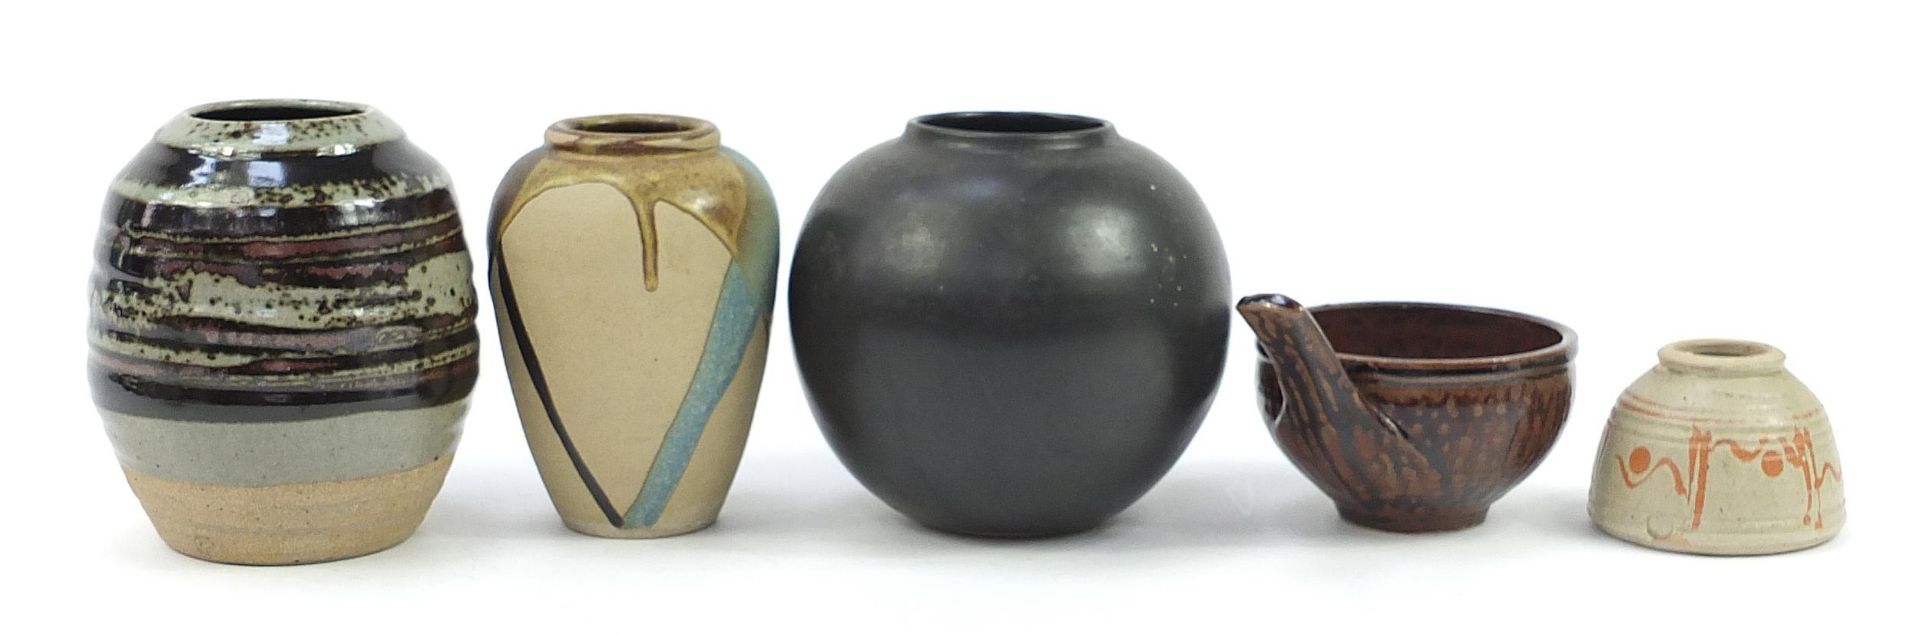 Studio pottery including a Michael Leach handled bowl and vase, possibly by Phil Rogers, the largest - Bild 4 aus 7